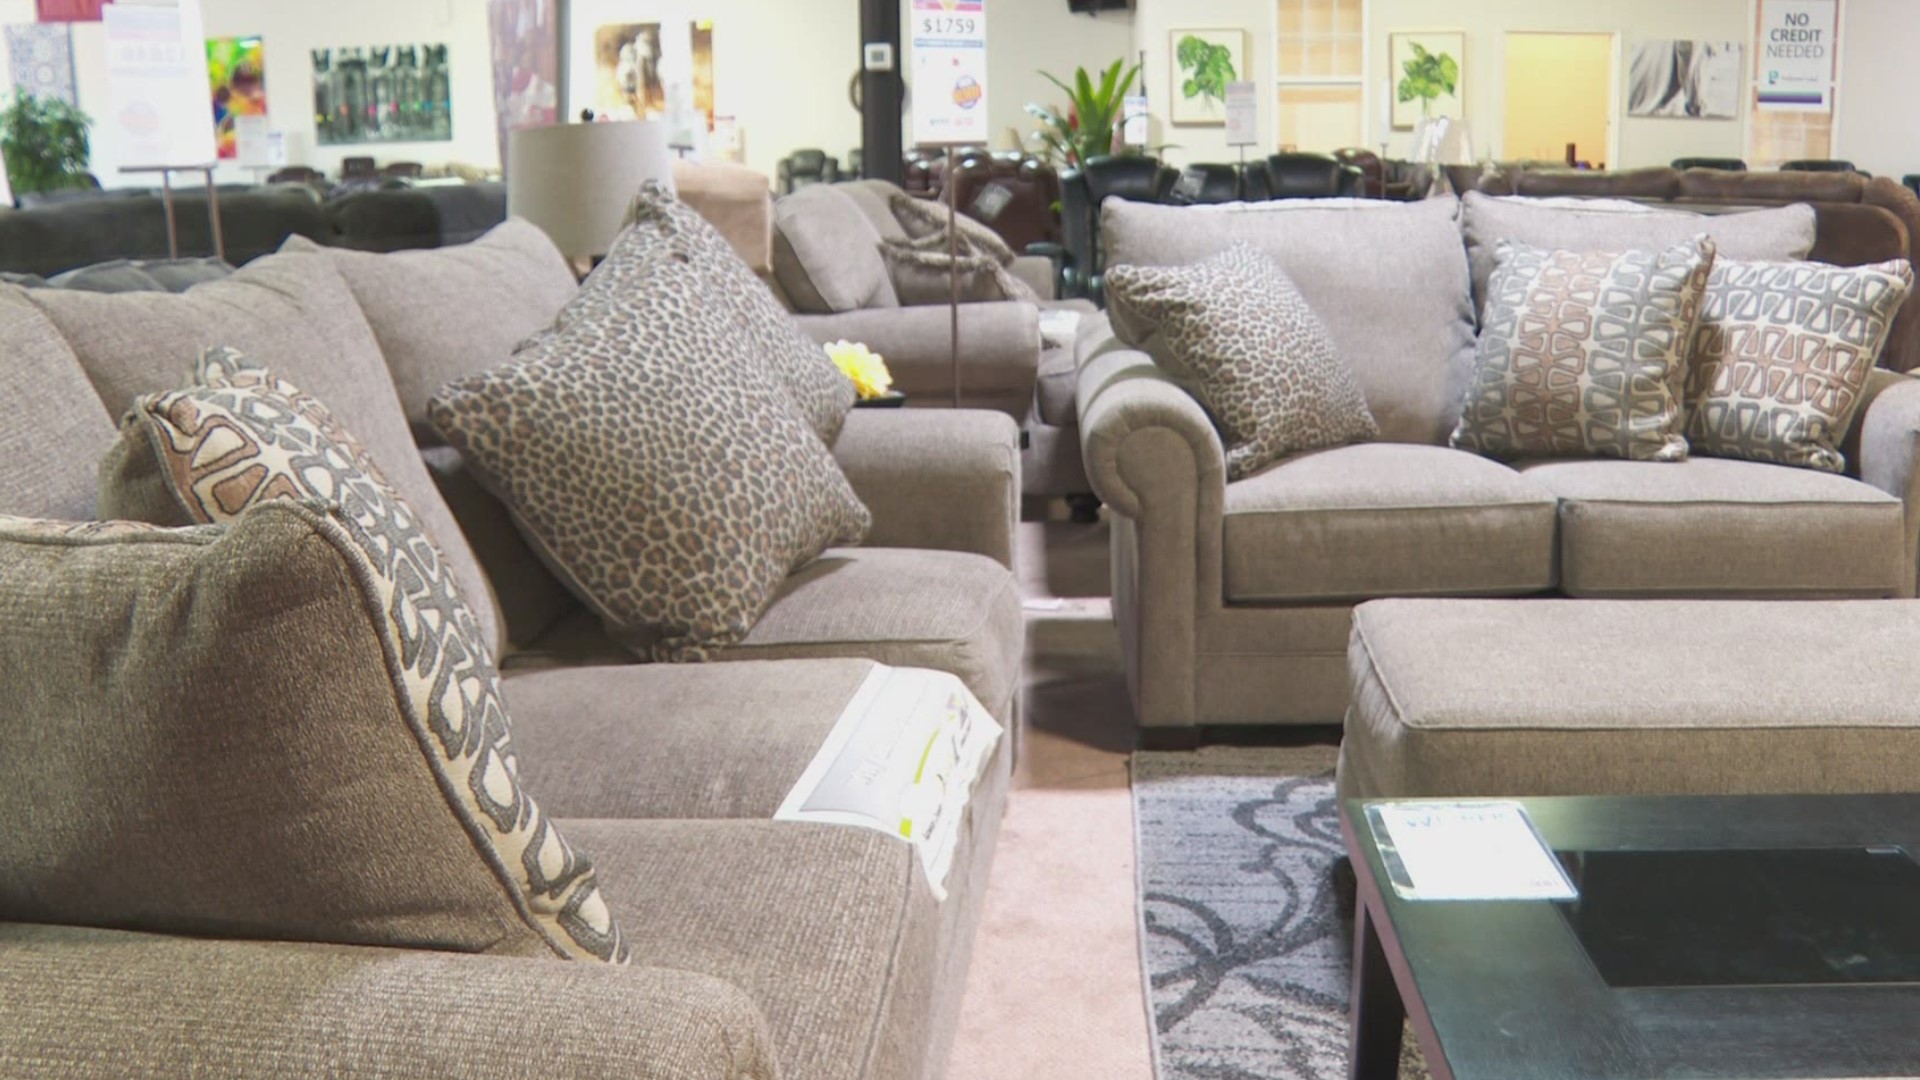 The furniture industry is the latest business facing delays related to the pandemic. Local shops say it takes weeks or even months to fill orders.